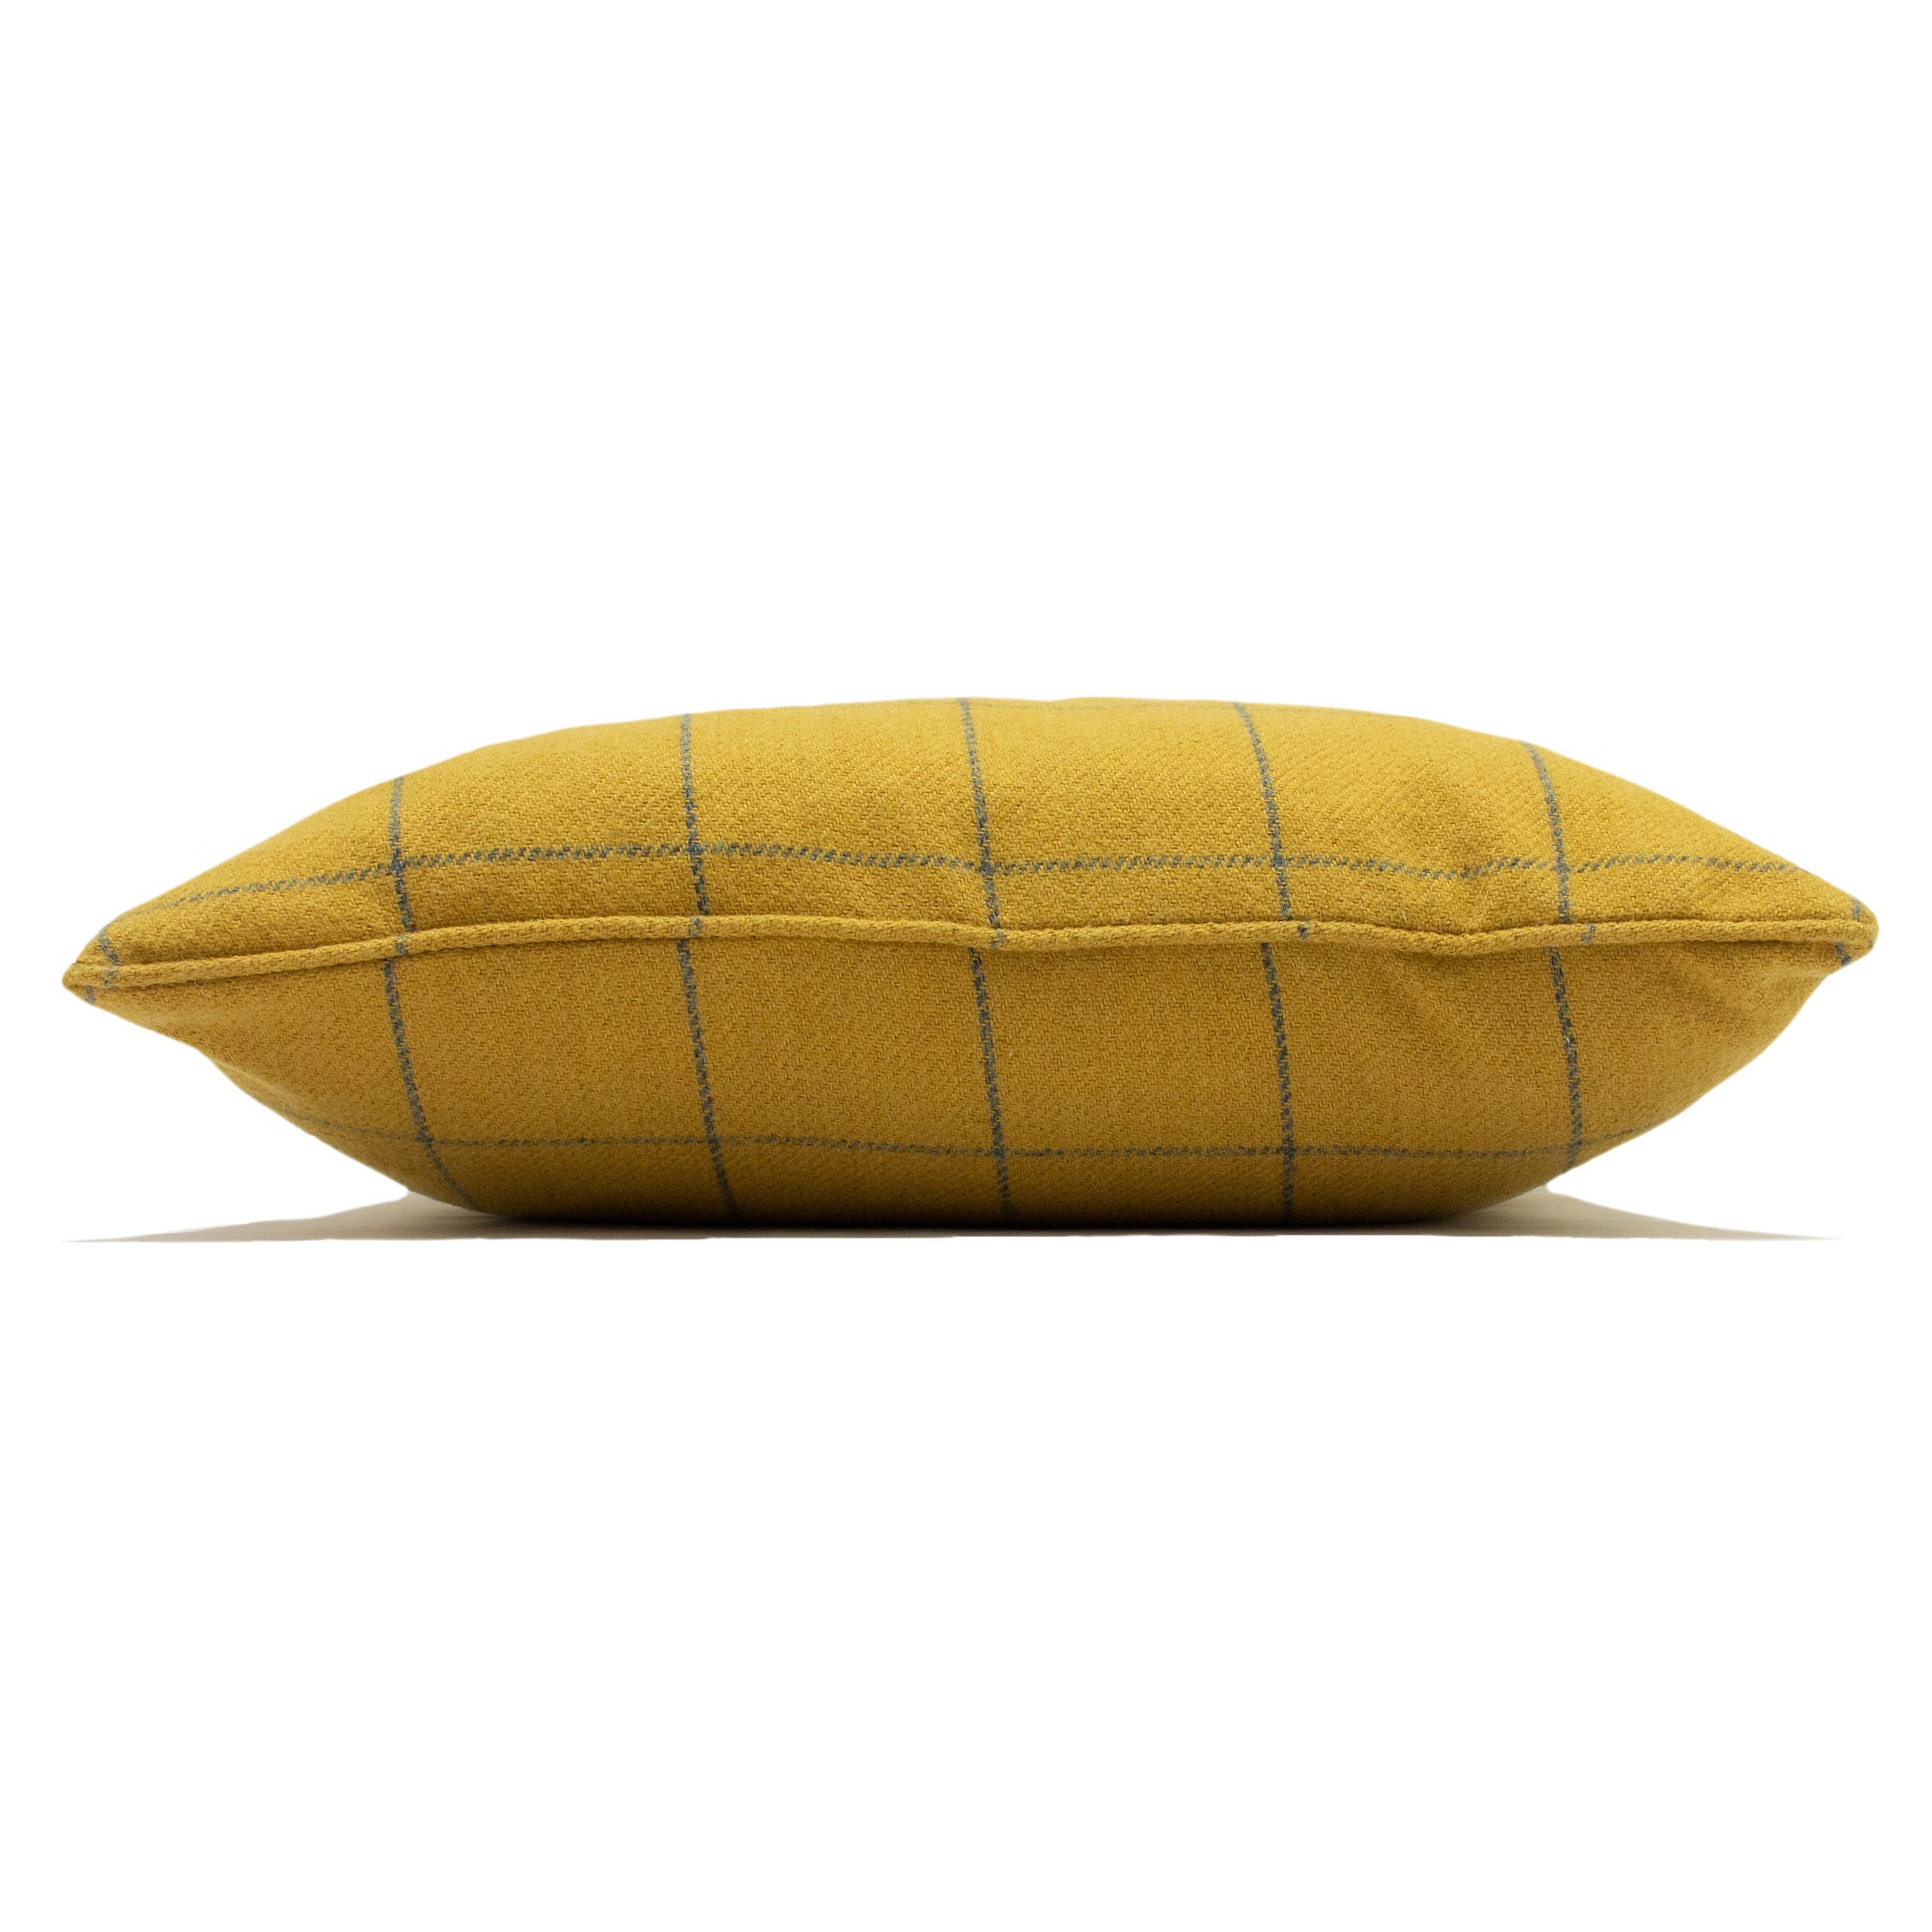 Add a cosy yet contemporary look to your décor with this modern and classic cushion. Made with a luxurious wool-like woven fabric, this matching reversible design is certainly a timeless choice. The woven-fabric design holds outstanding durability and wrinkle resistance as well as having strong rustic colours that will compliment any interior as well as bed, sofa or armchair.